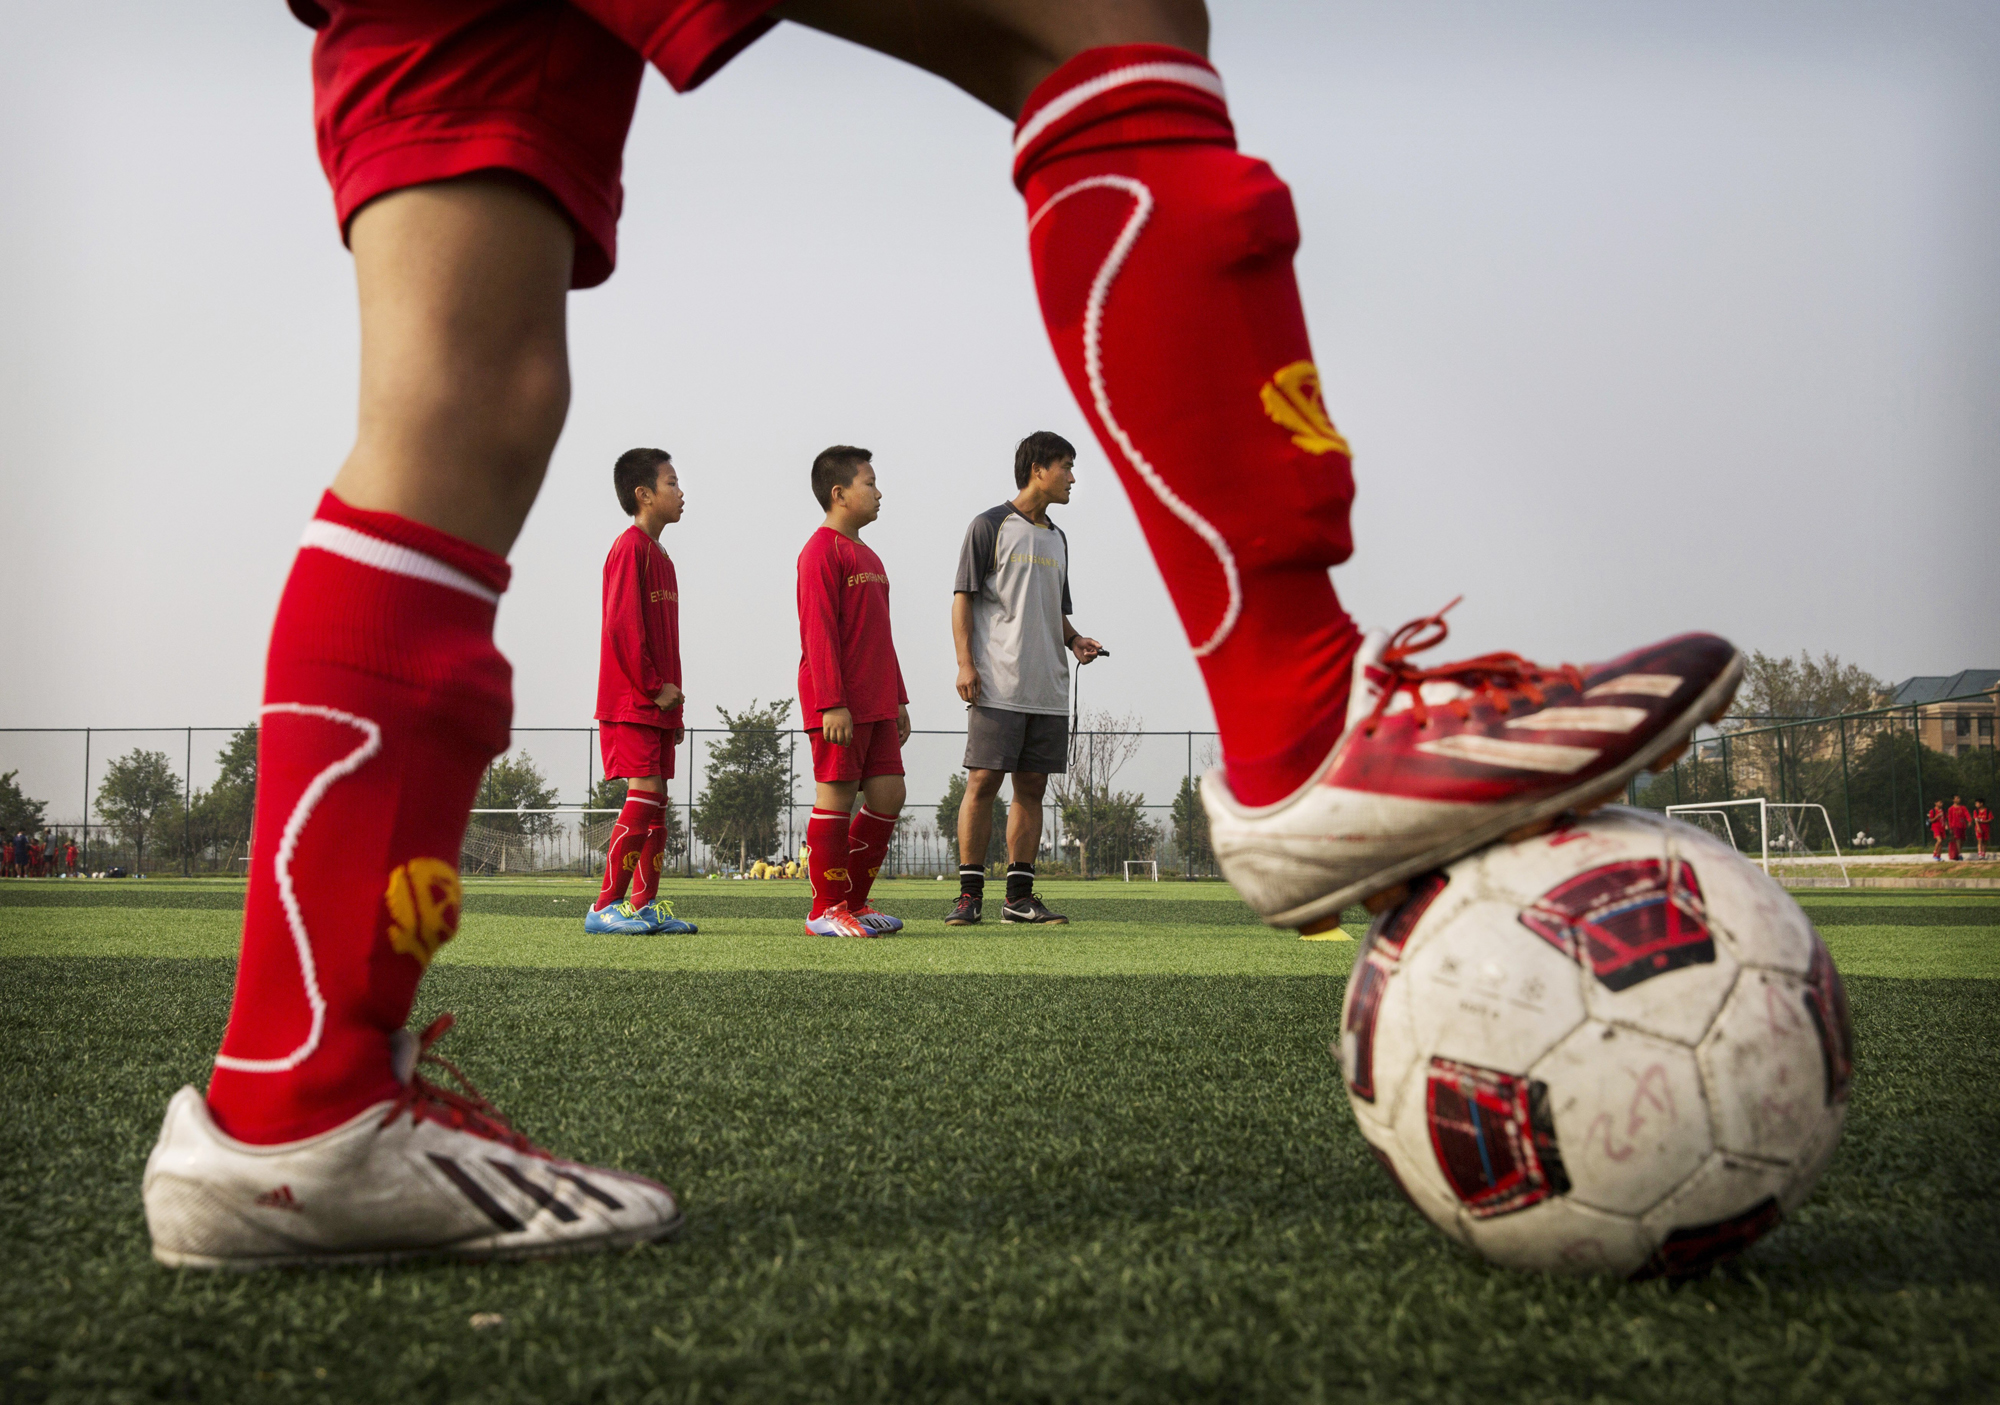 A coach interacts with students during training at the Evergrande International Football School on June 14 near Qingyuan in Guangdong Province.